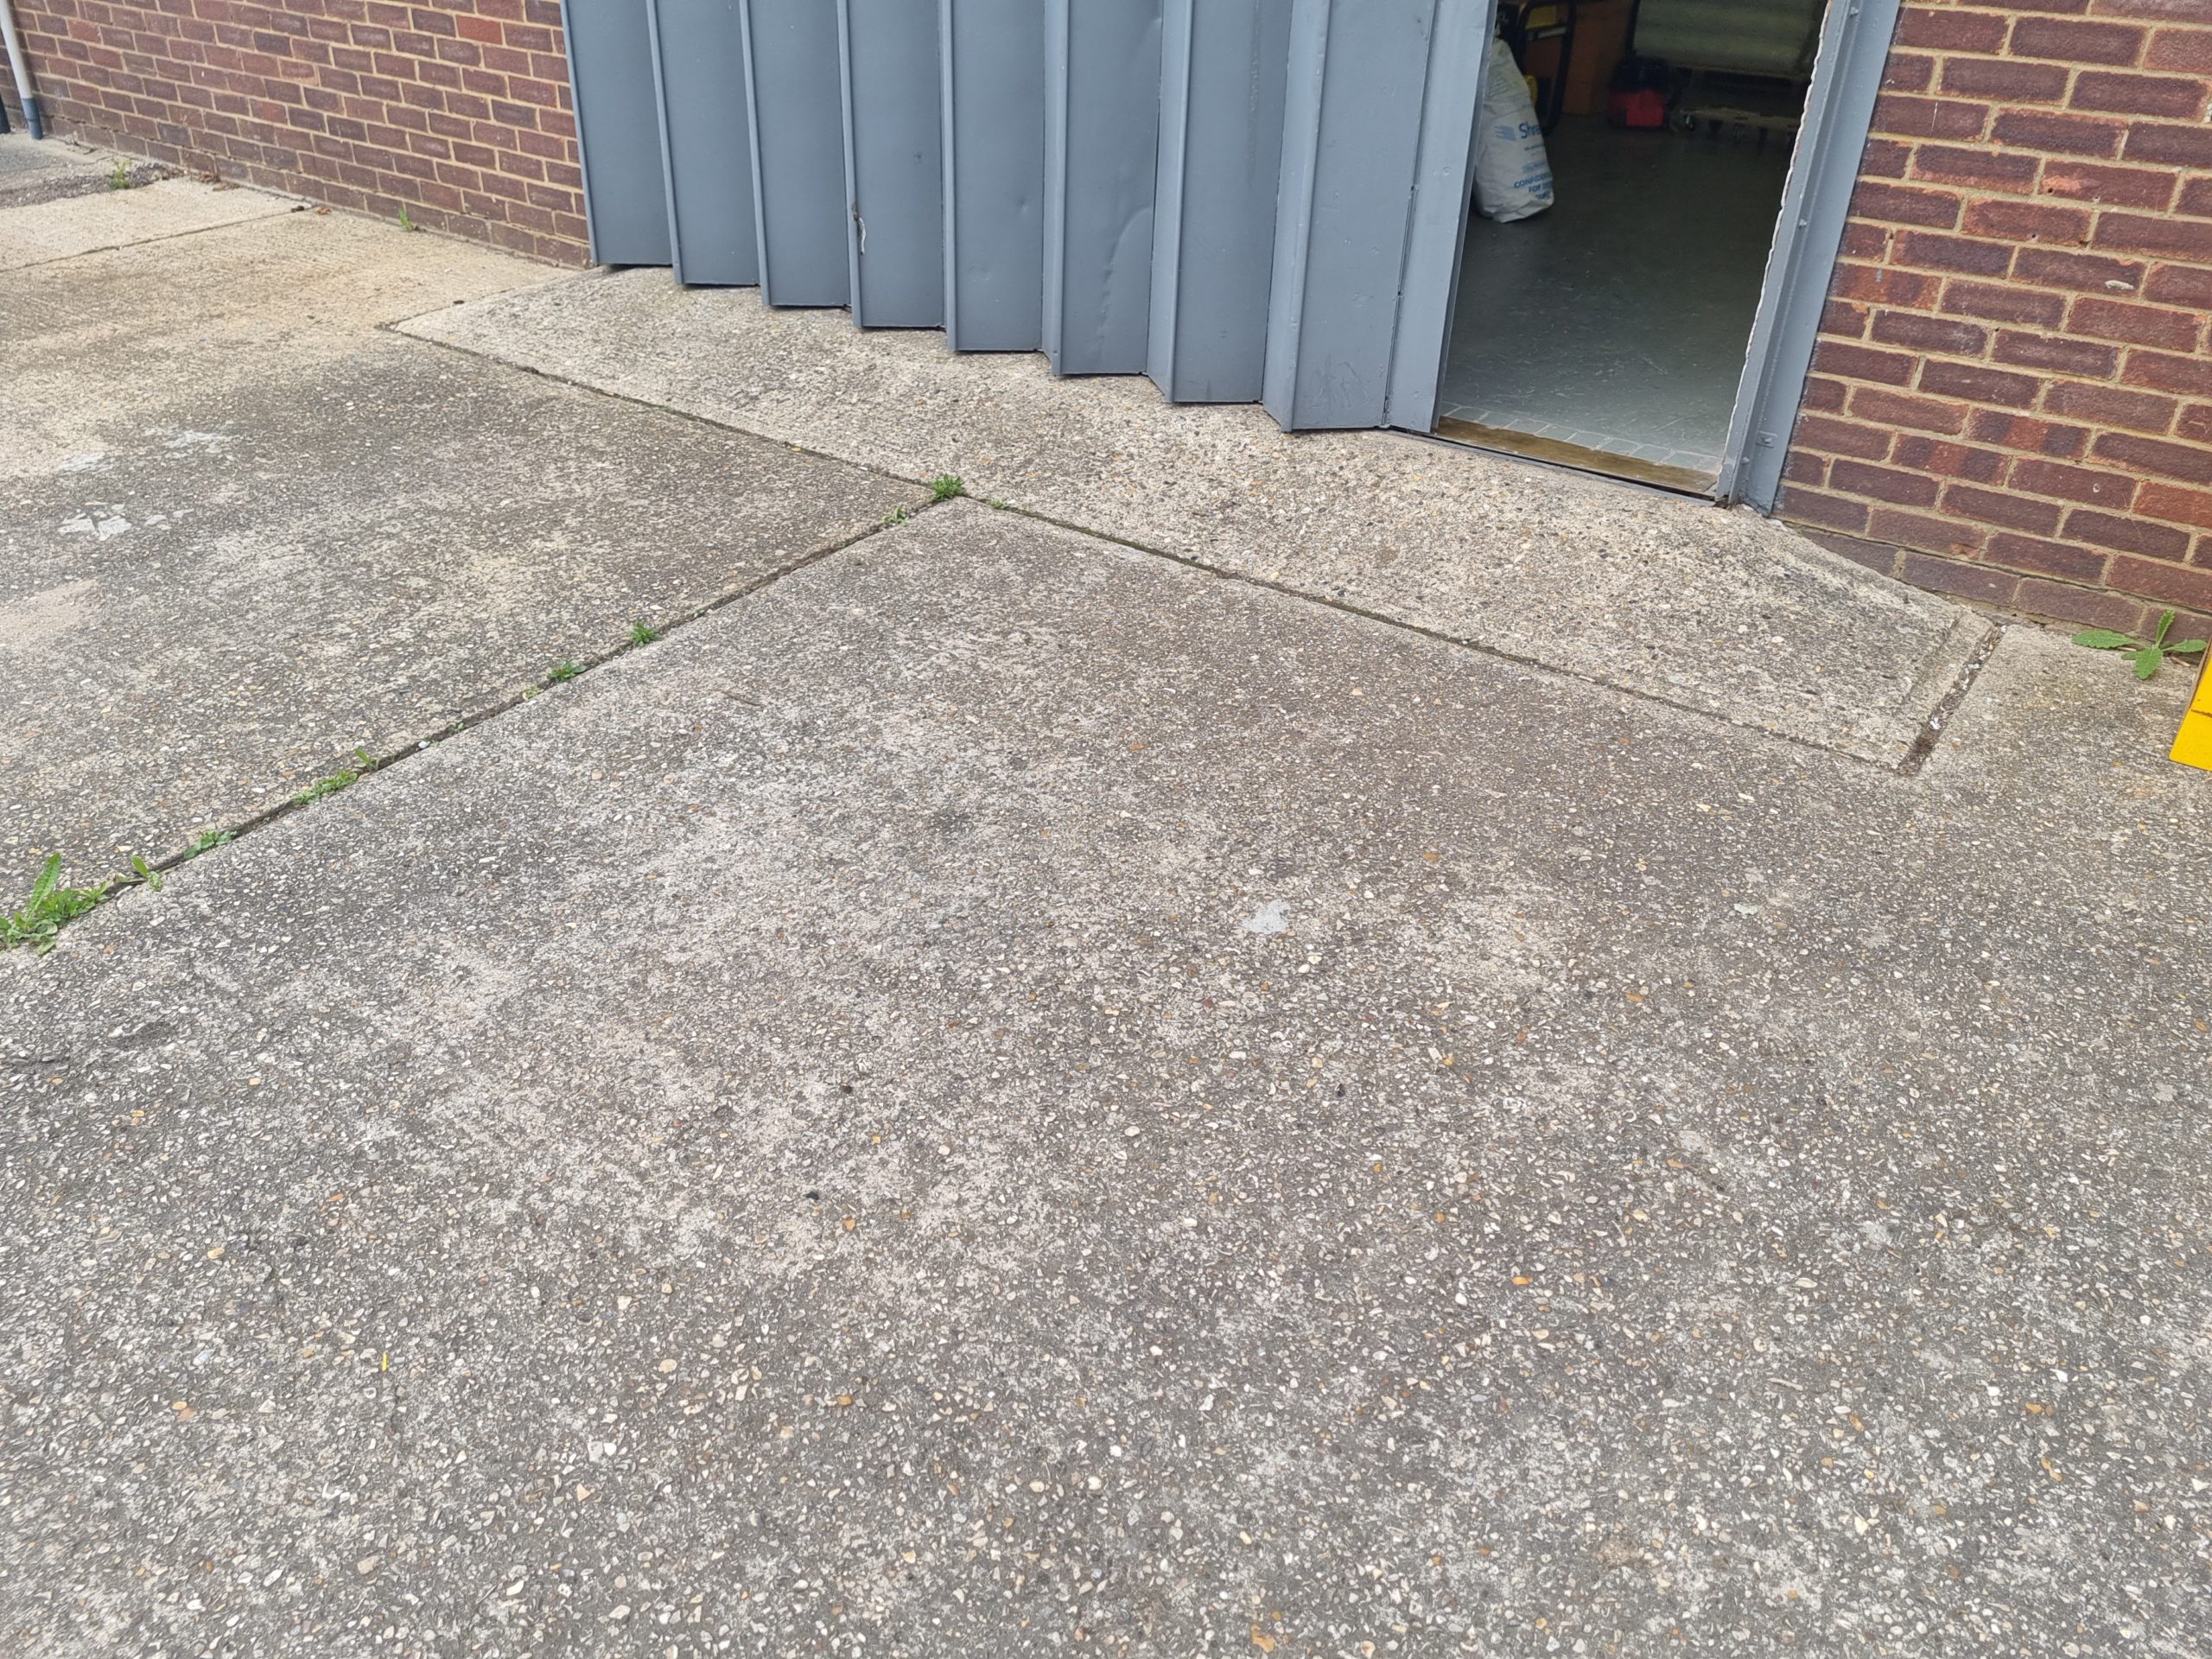 Before driveway cleaning – Our garage entrance